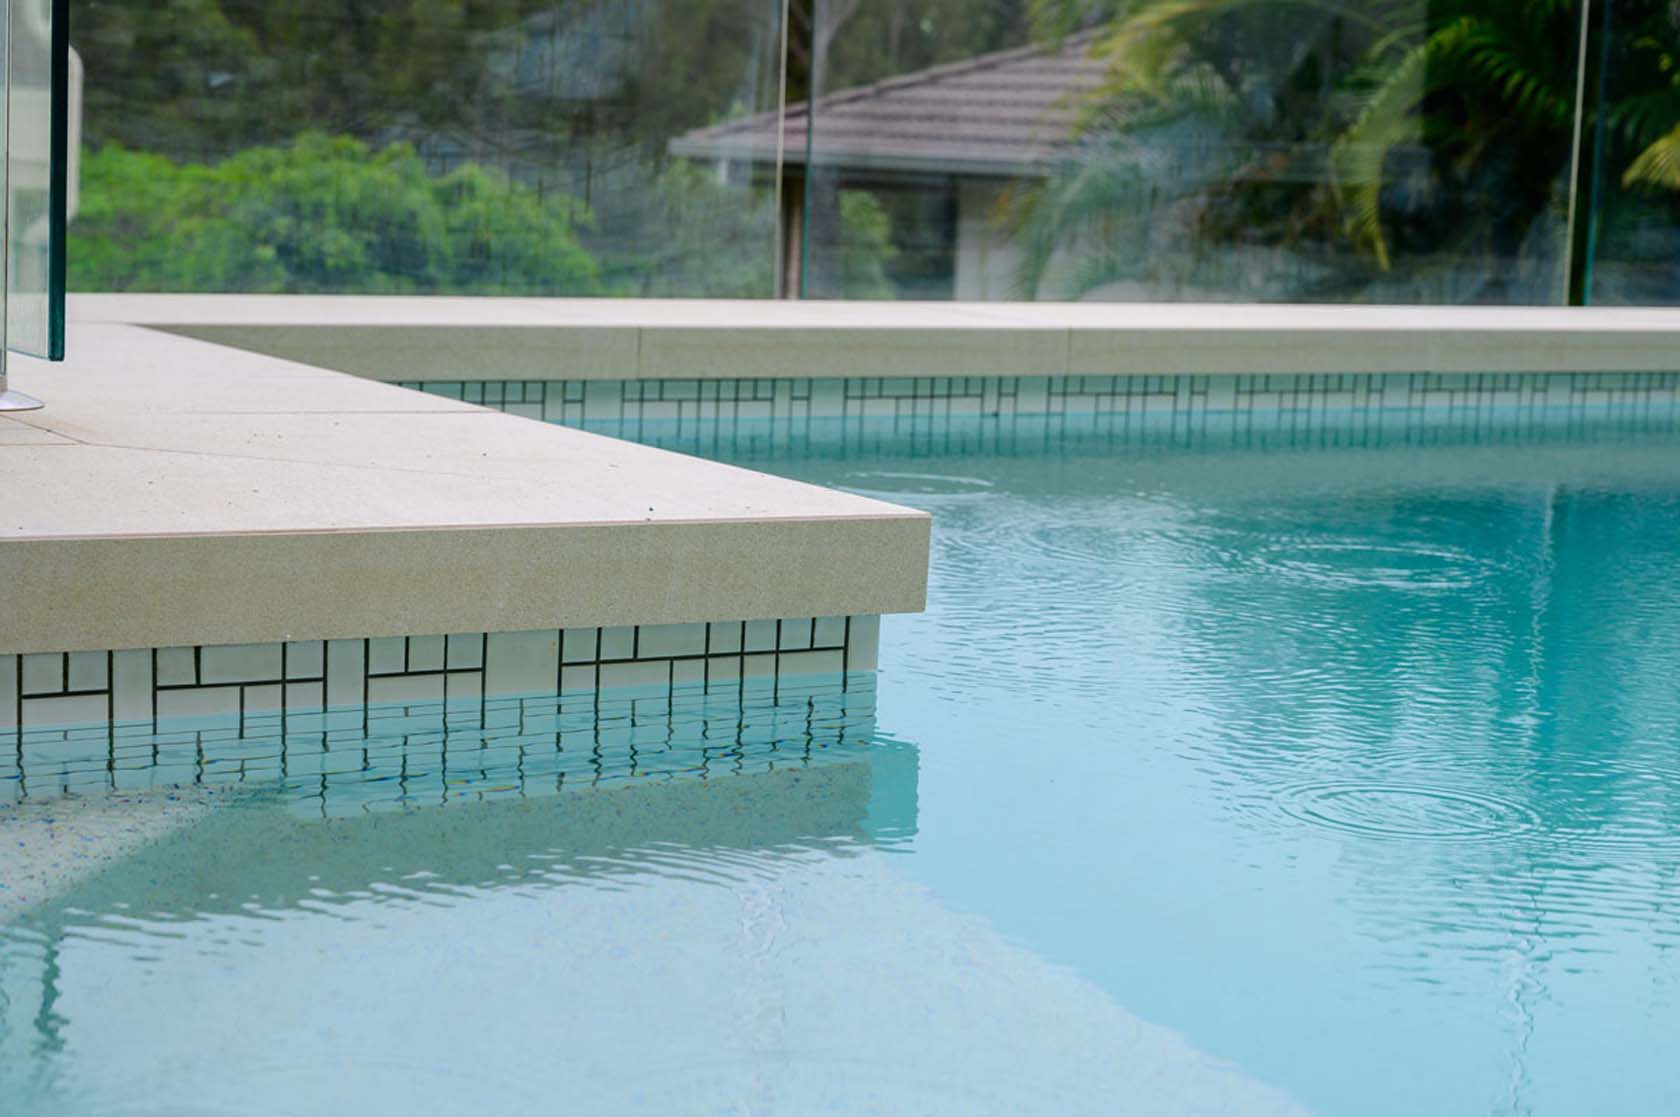 Pluto Porcelain Dropface pool coping with Urban White ceramic waterline tiles